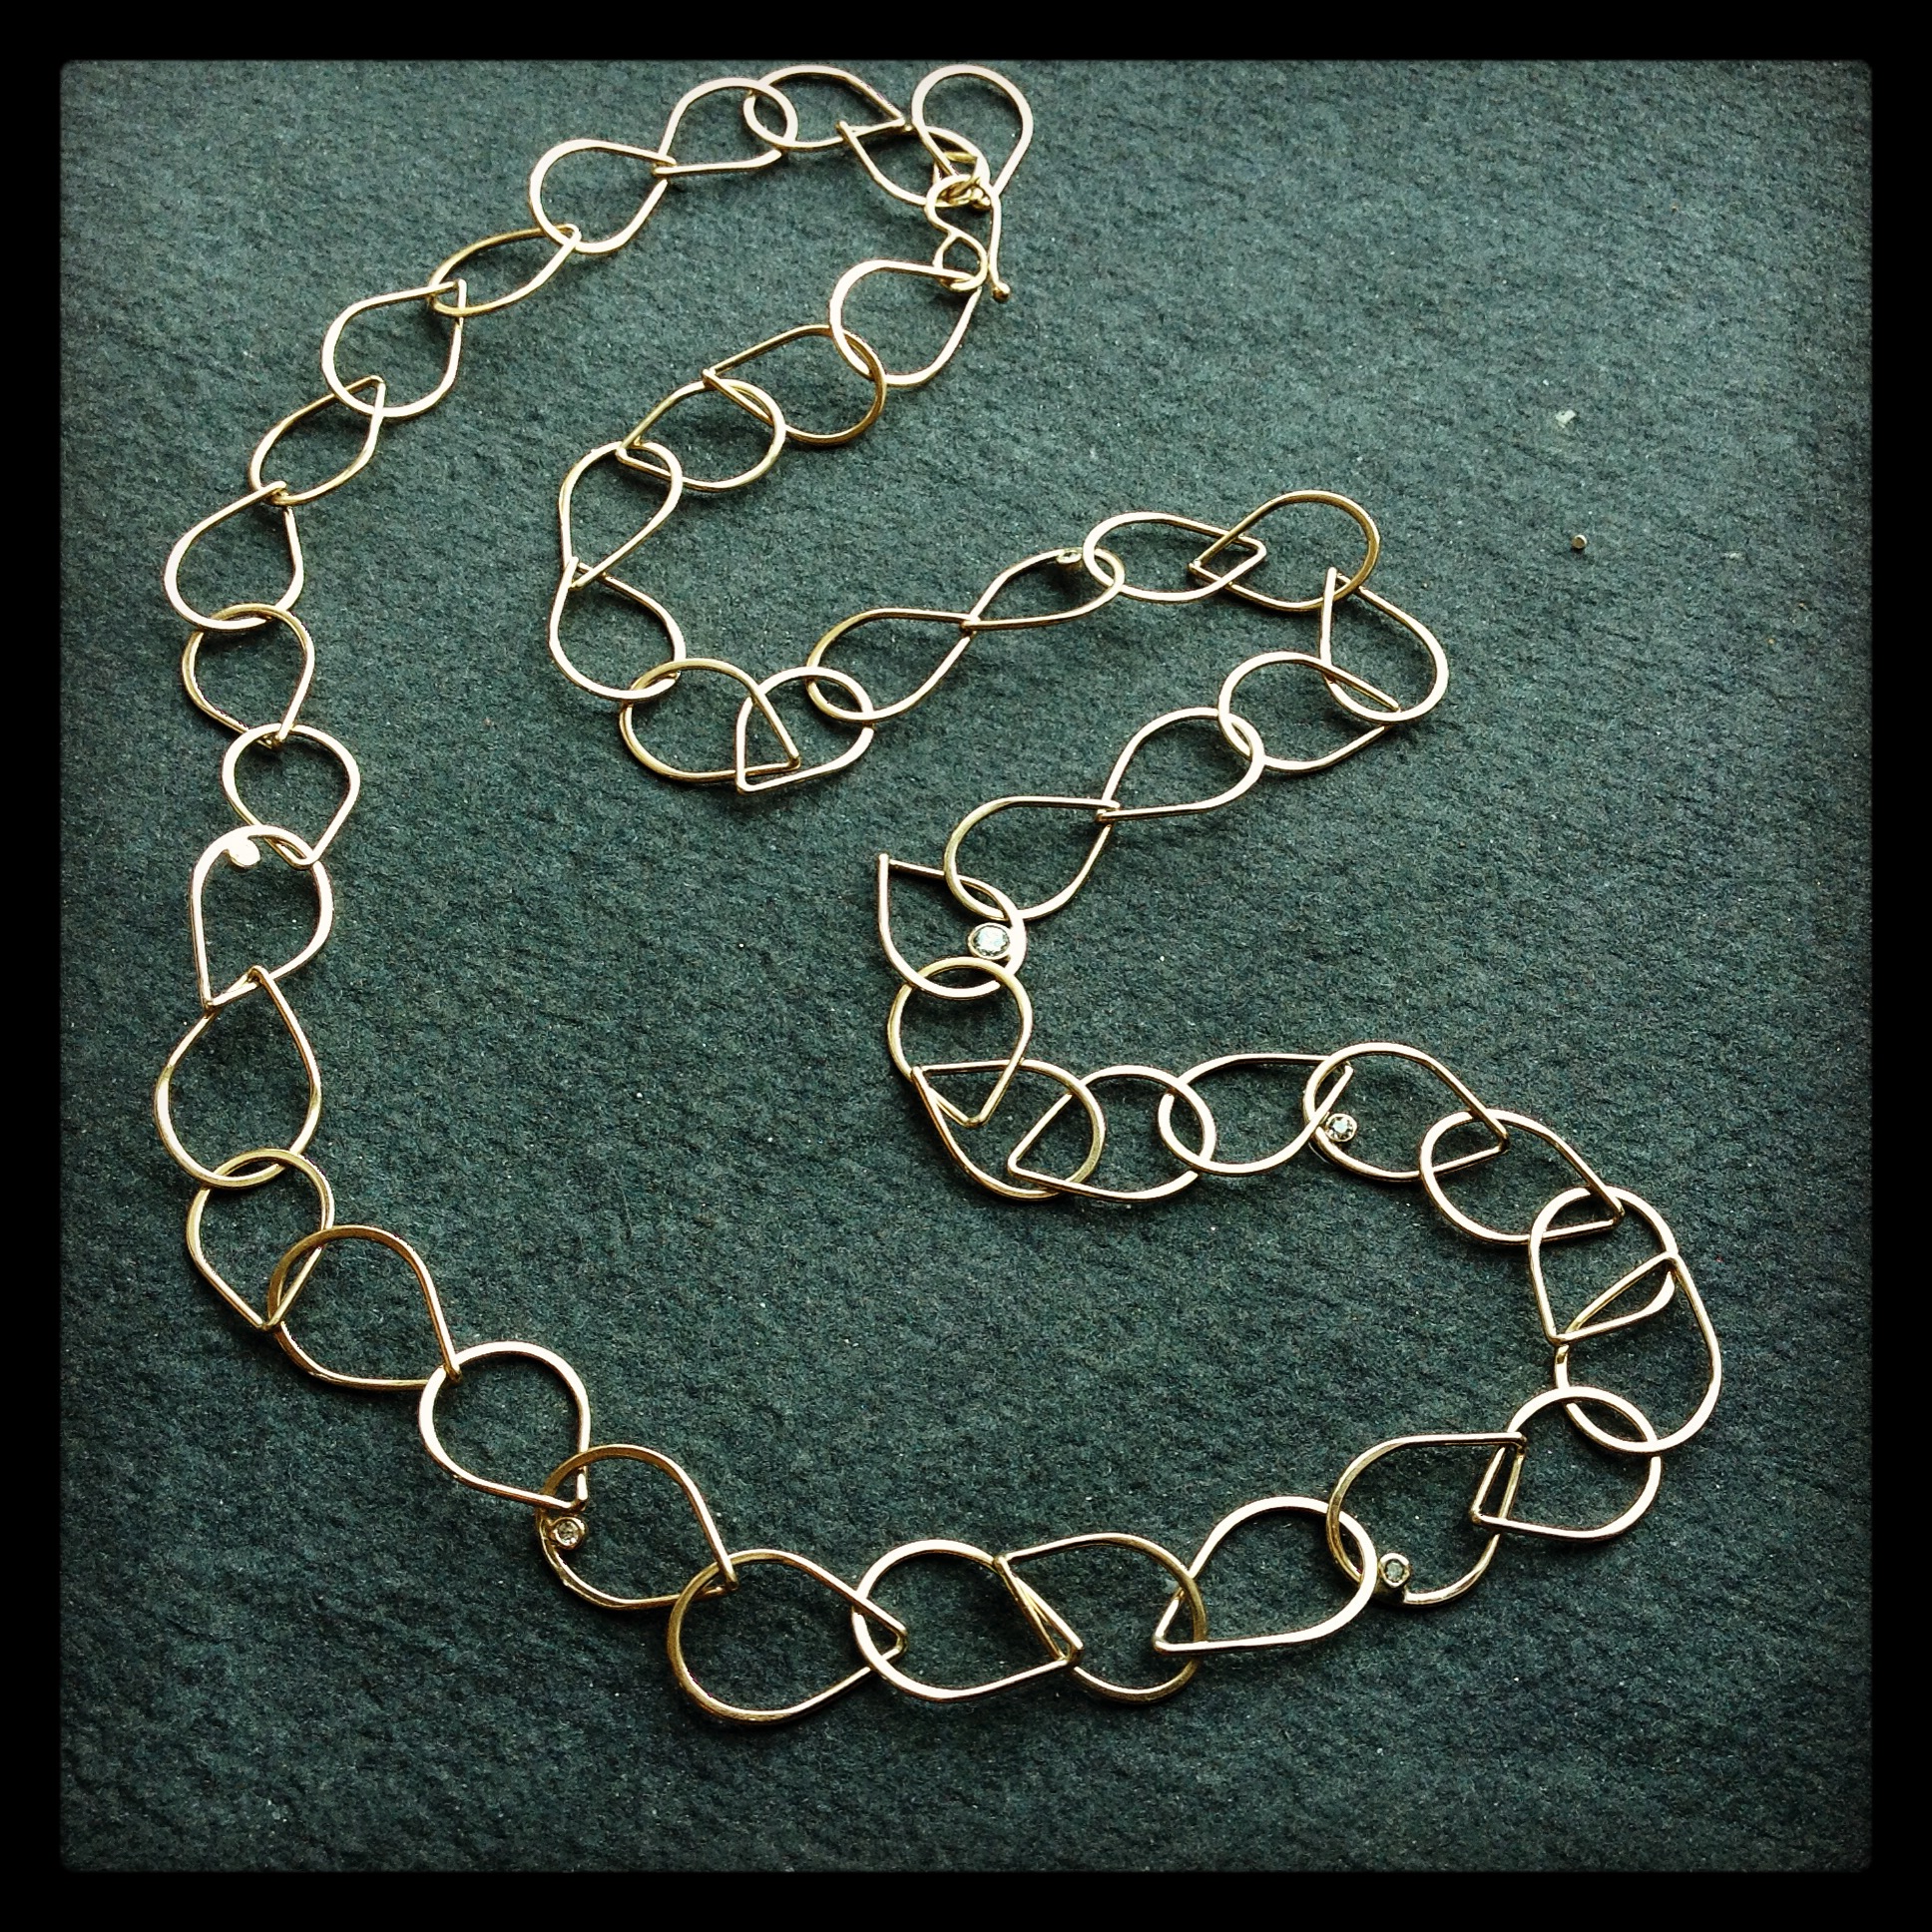 Merus recycled gold and diamond necklace